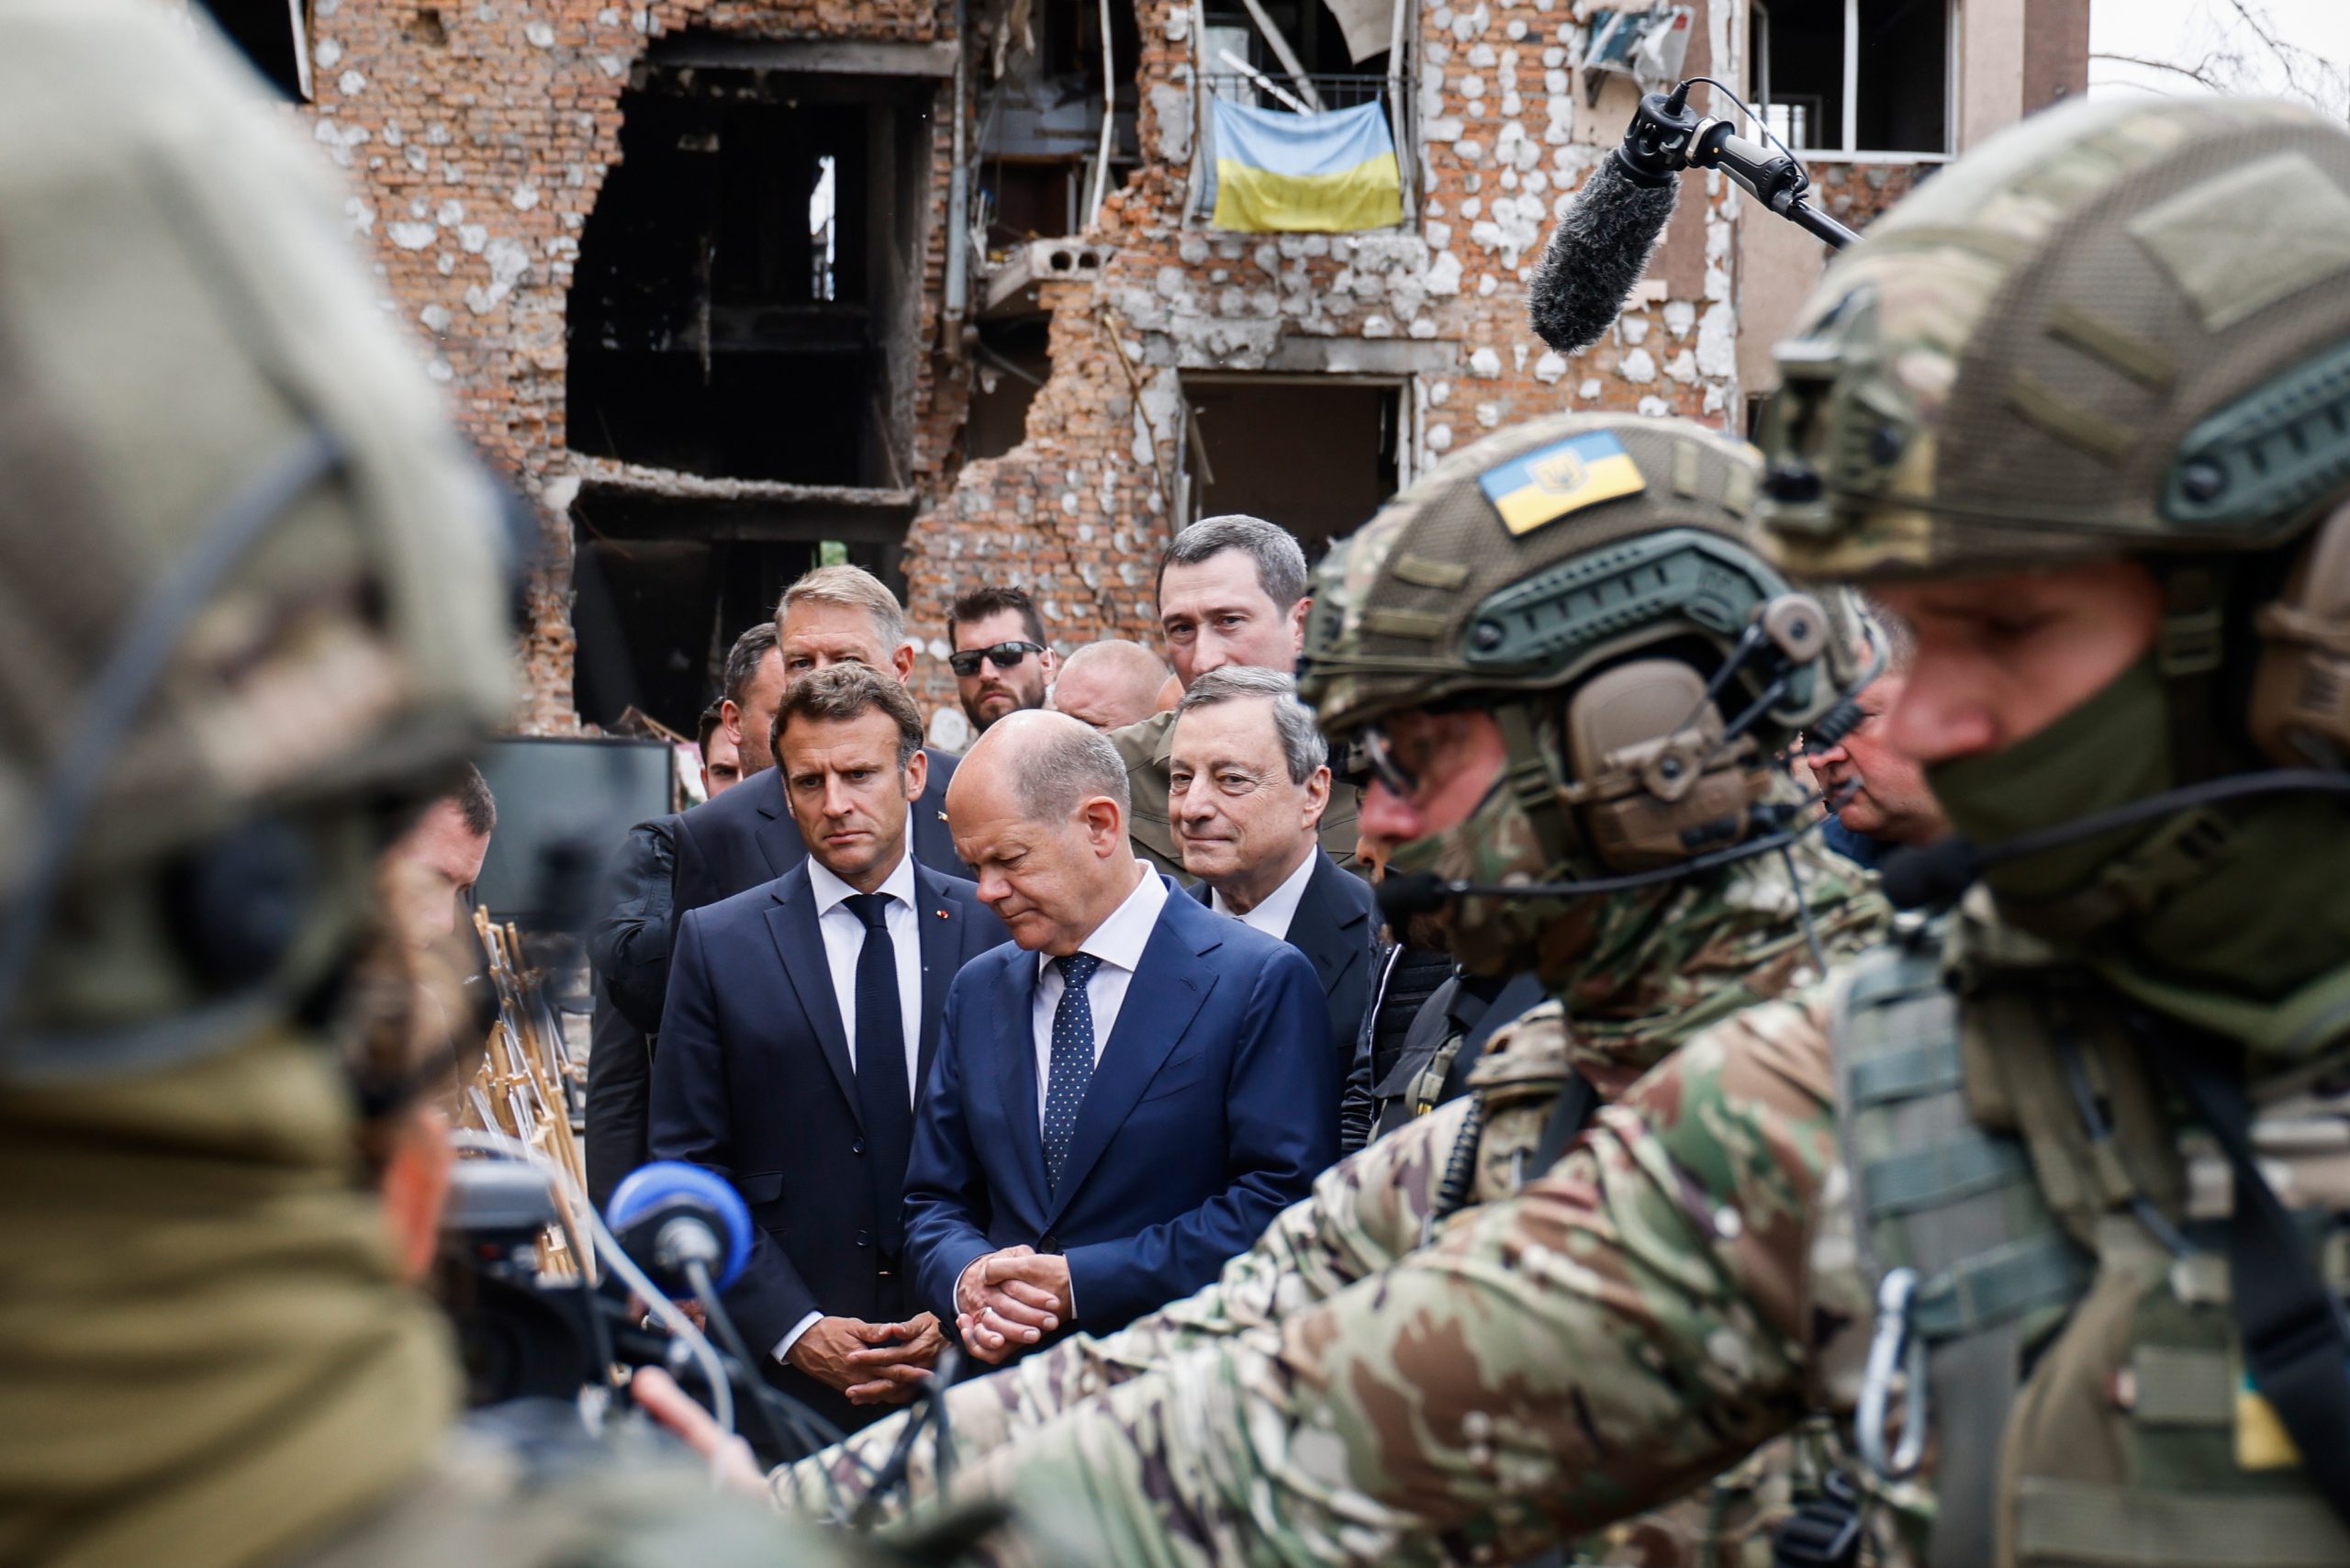 epa10015602 French President Emmanuel Macron (C-L), German Chancellor Olaf Scholz (C) and Italian Prime Minister Mario Draghi (C-R) visit Irpin, Ukraine, 16 June 2022. The three EU leaders arrived on a night train from Poland to Kyiv and will meet Ukrainian President Volodymyr Zelensky, at a time when the country is pushing for EU membership.  EPA/LUDOVIC MARIN / POOL MAXPPP OUT